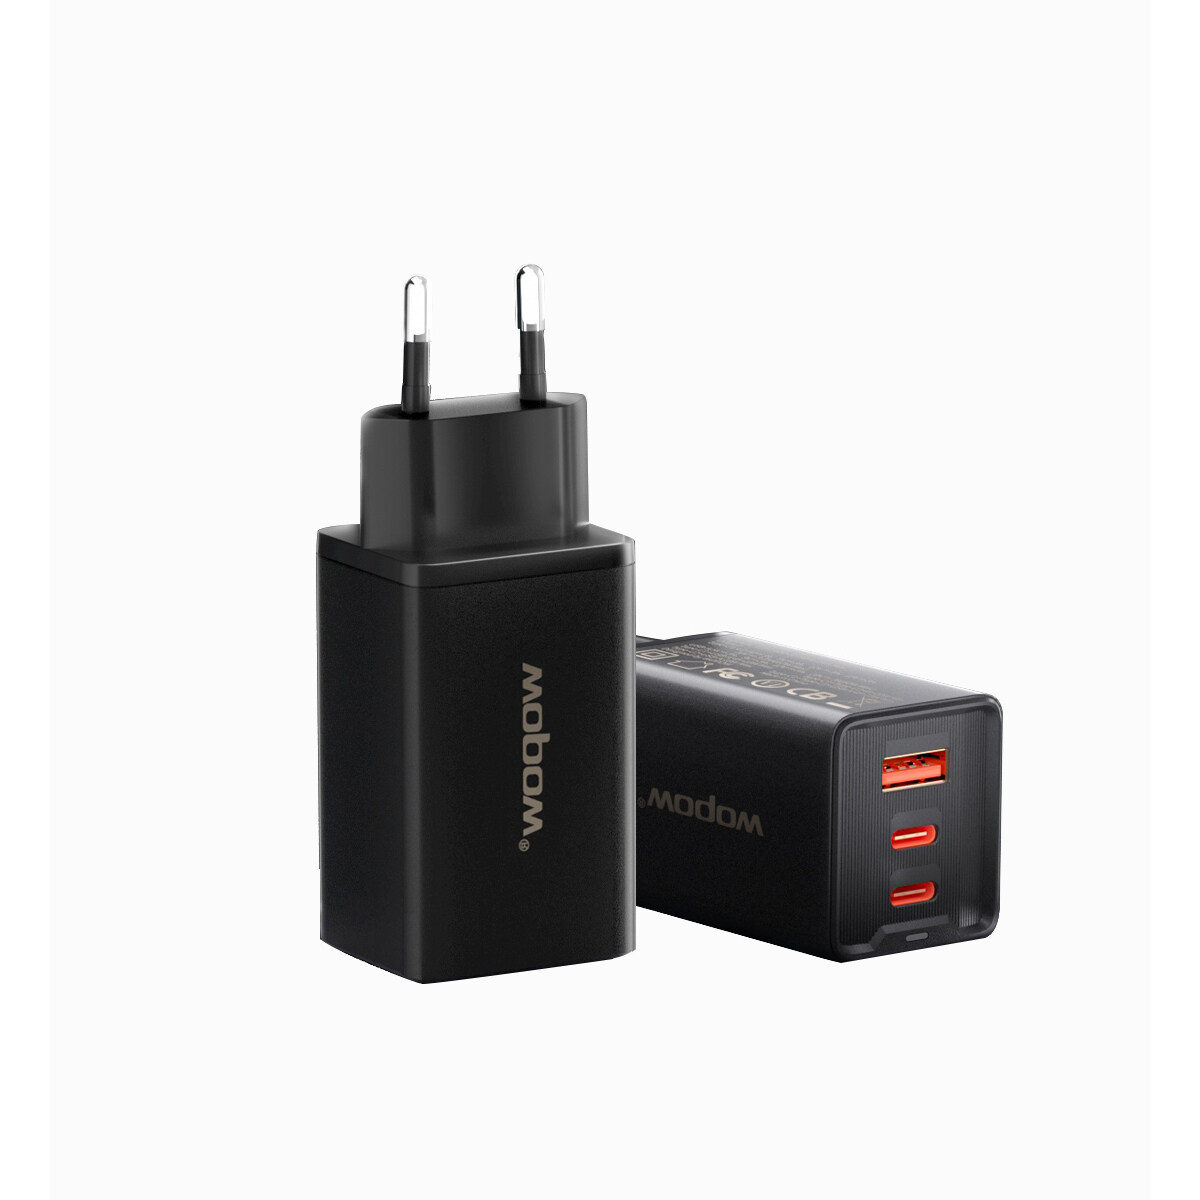 Pin Travel Charger, travel pro charger, travel quick charger, travel charger adapter plug